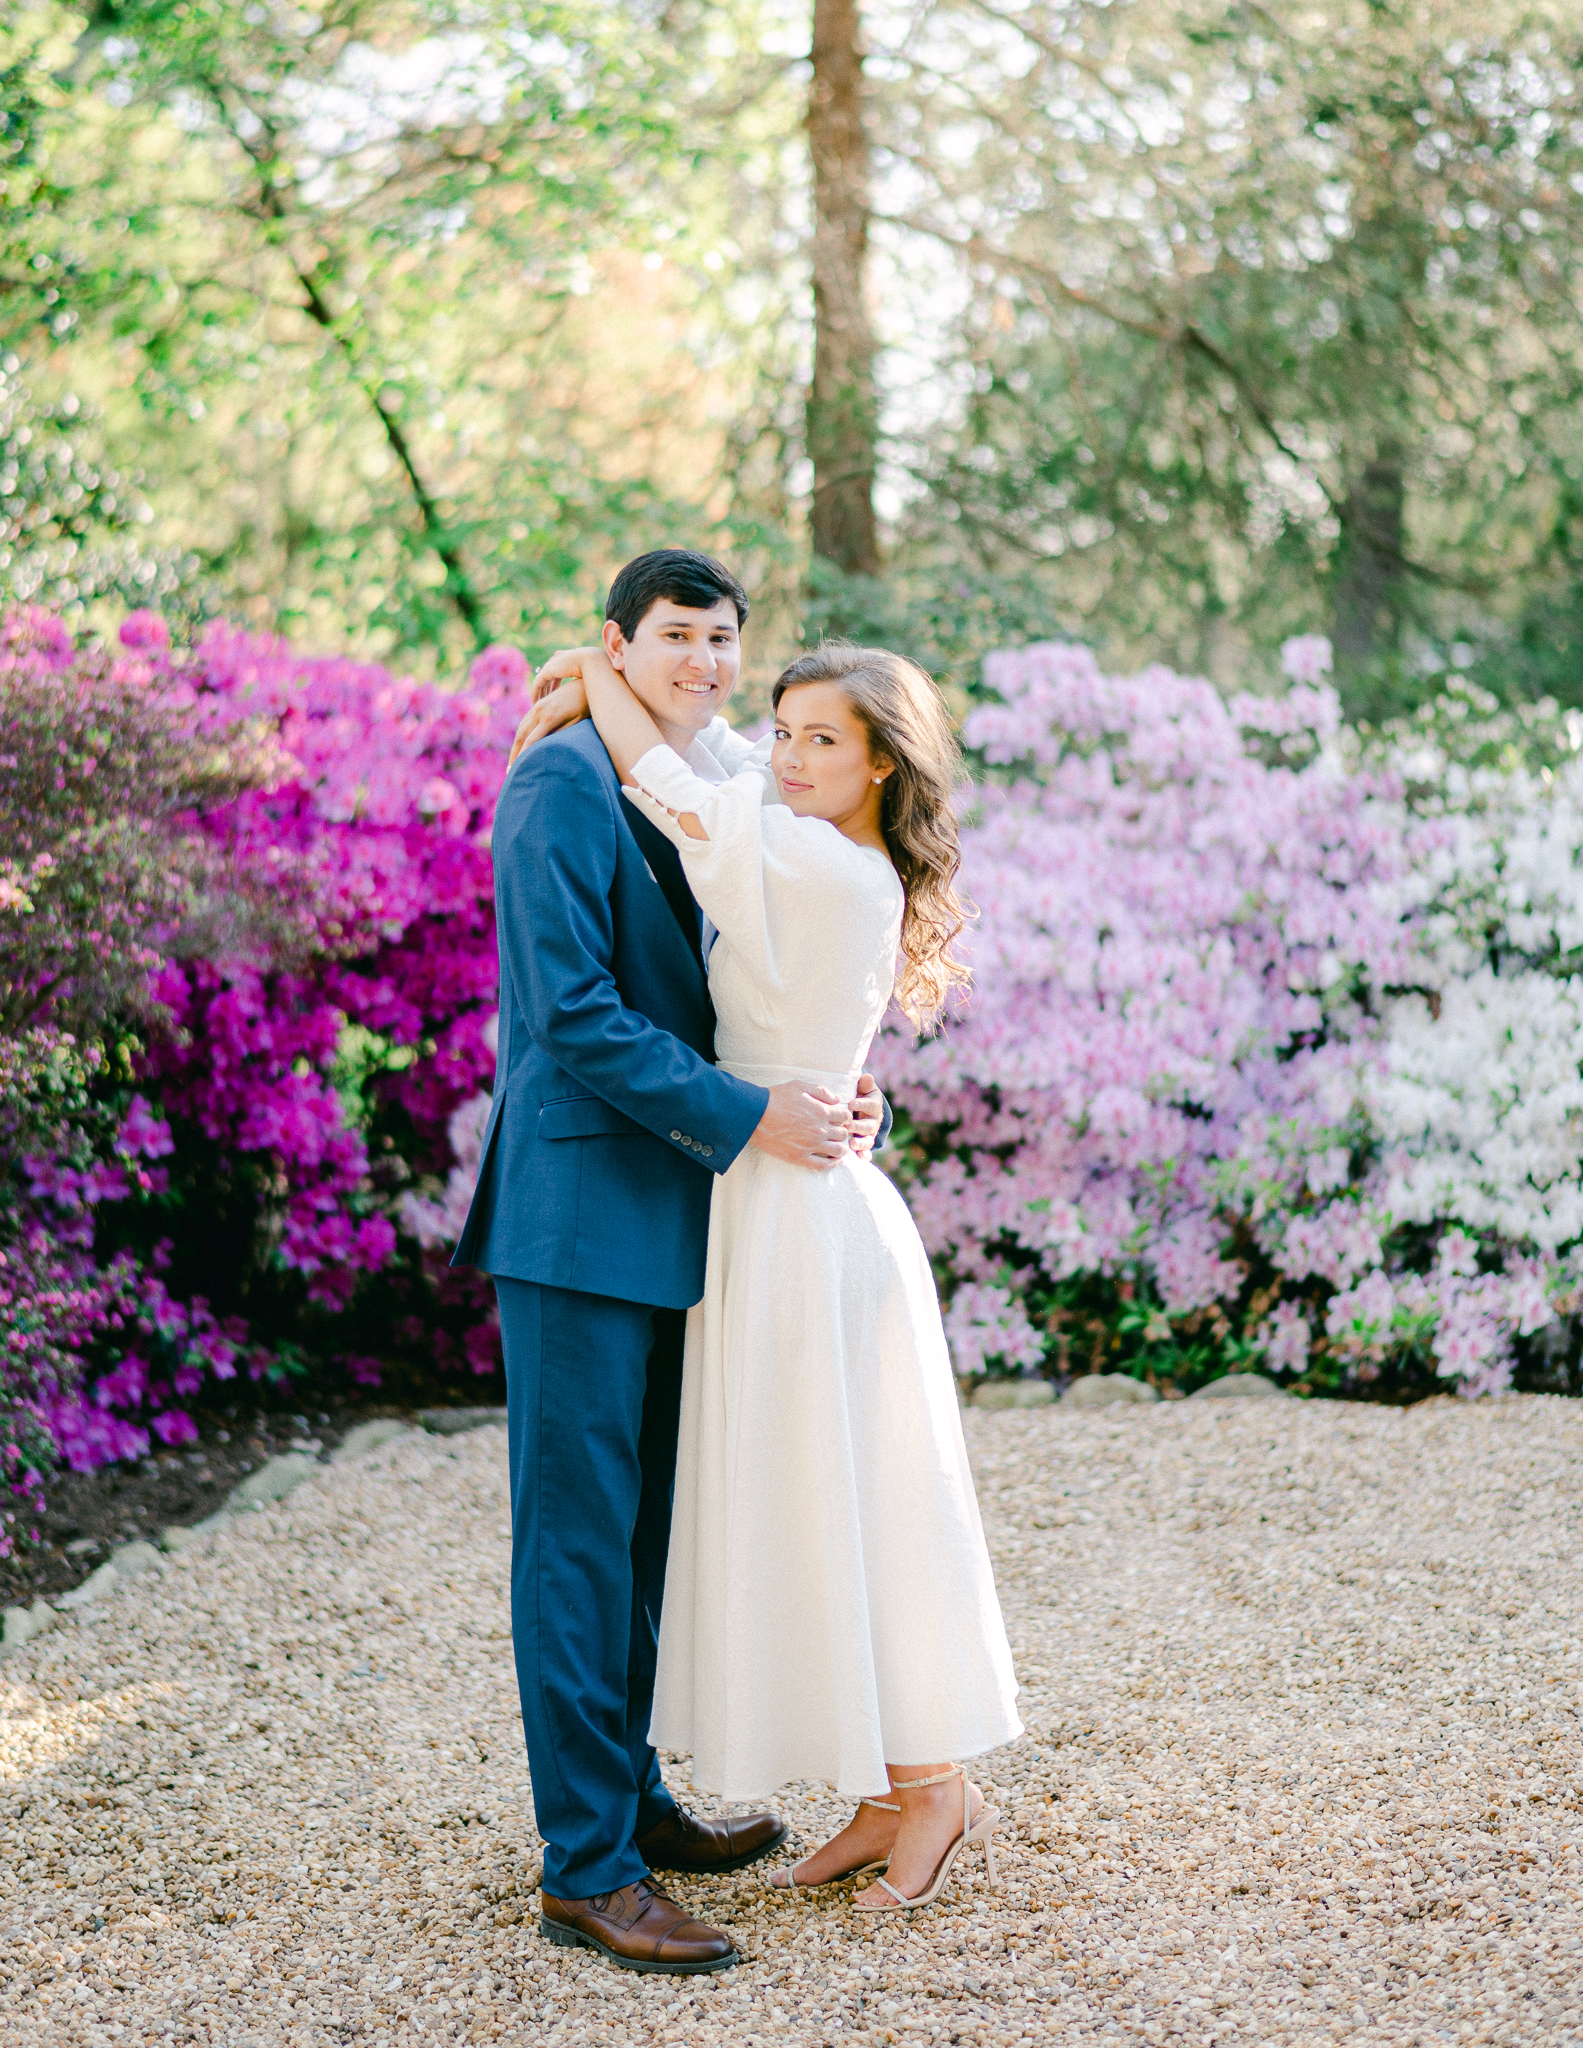 girl in a long white dress with guy in a navy blue suit with a bed of pink & purple florals behind them.